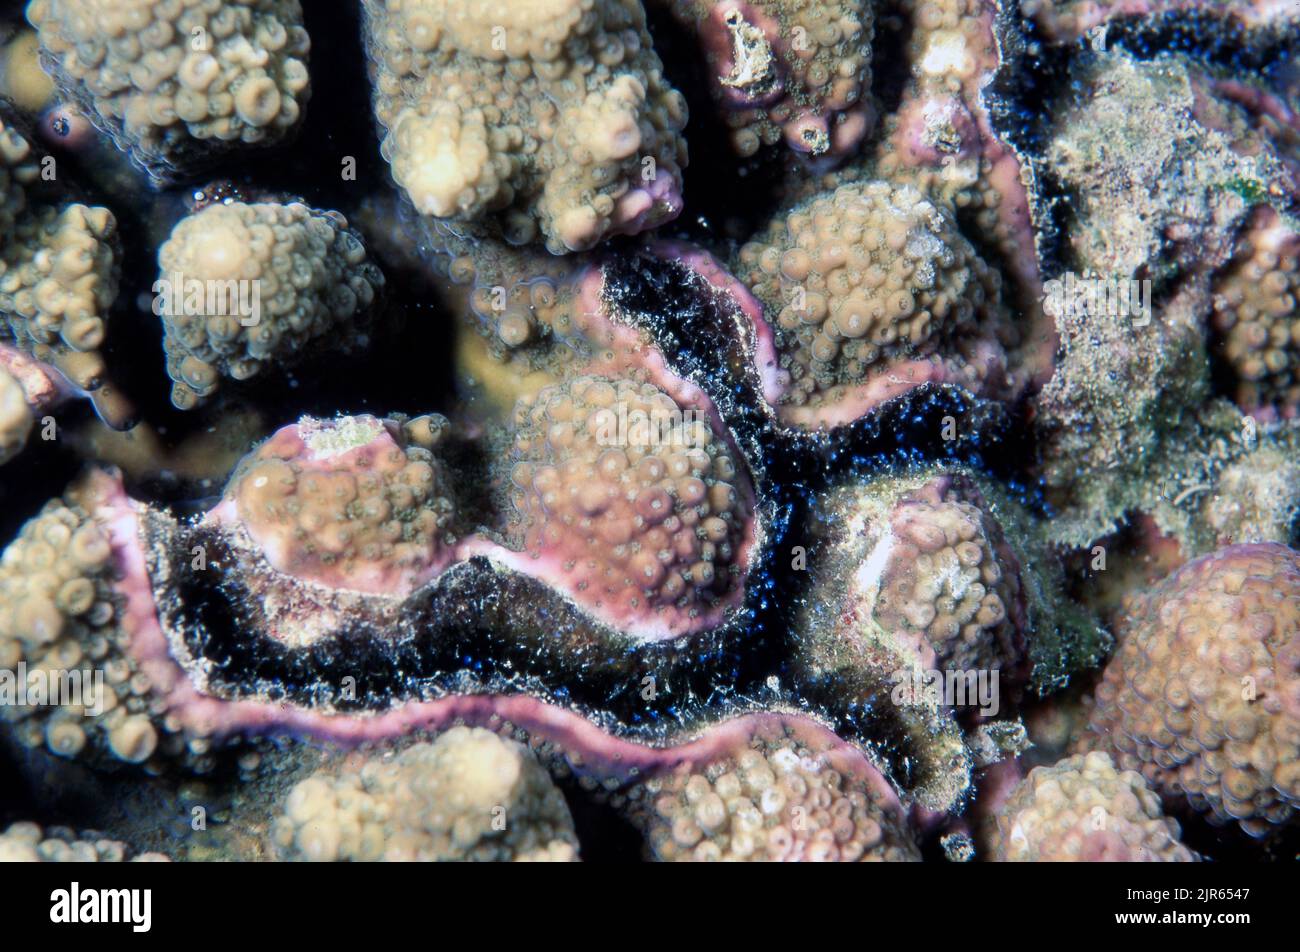 Burrows of the petroglyph shrimp Alpheus deuteropus in stony corals (Acropora sp.) from Krabi, Thailand. Do note the small, munidentified hydrozoans t Stock Photo